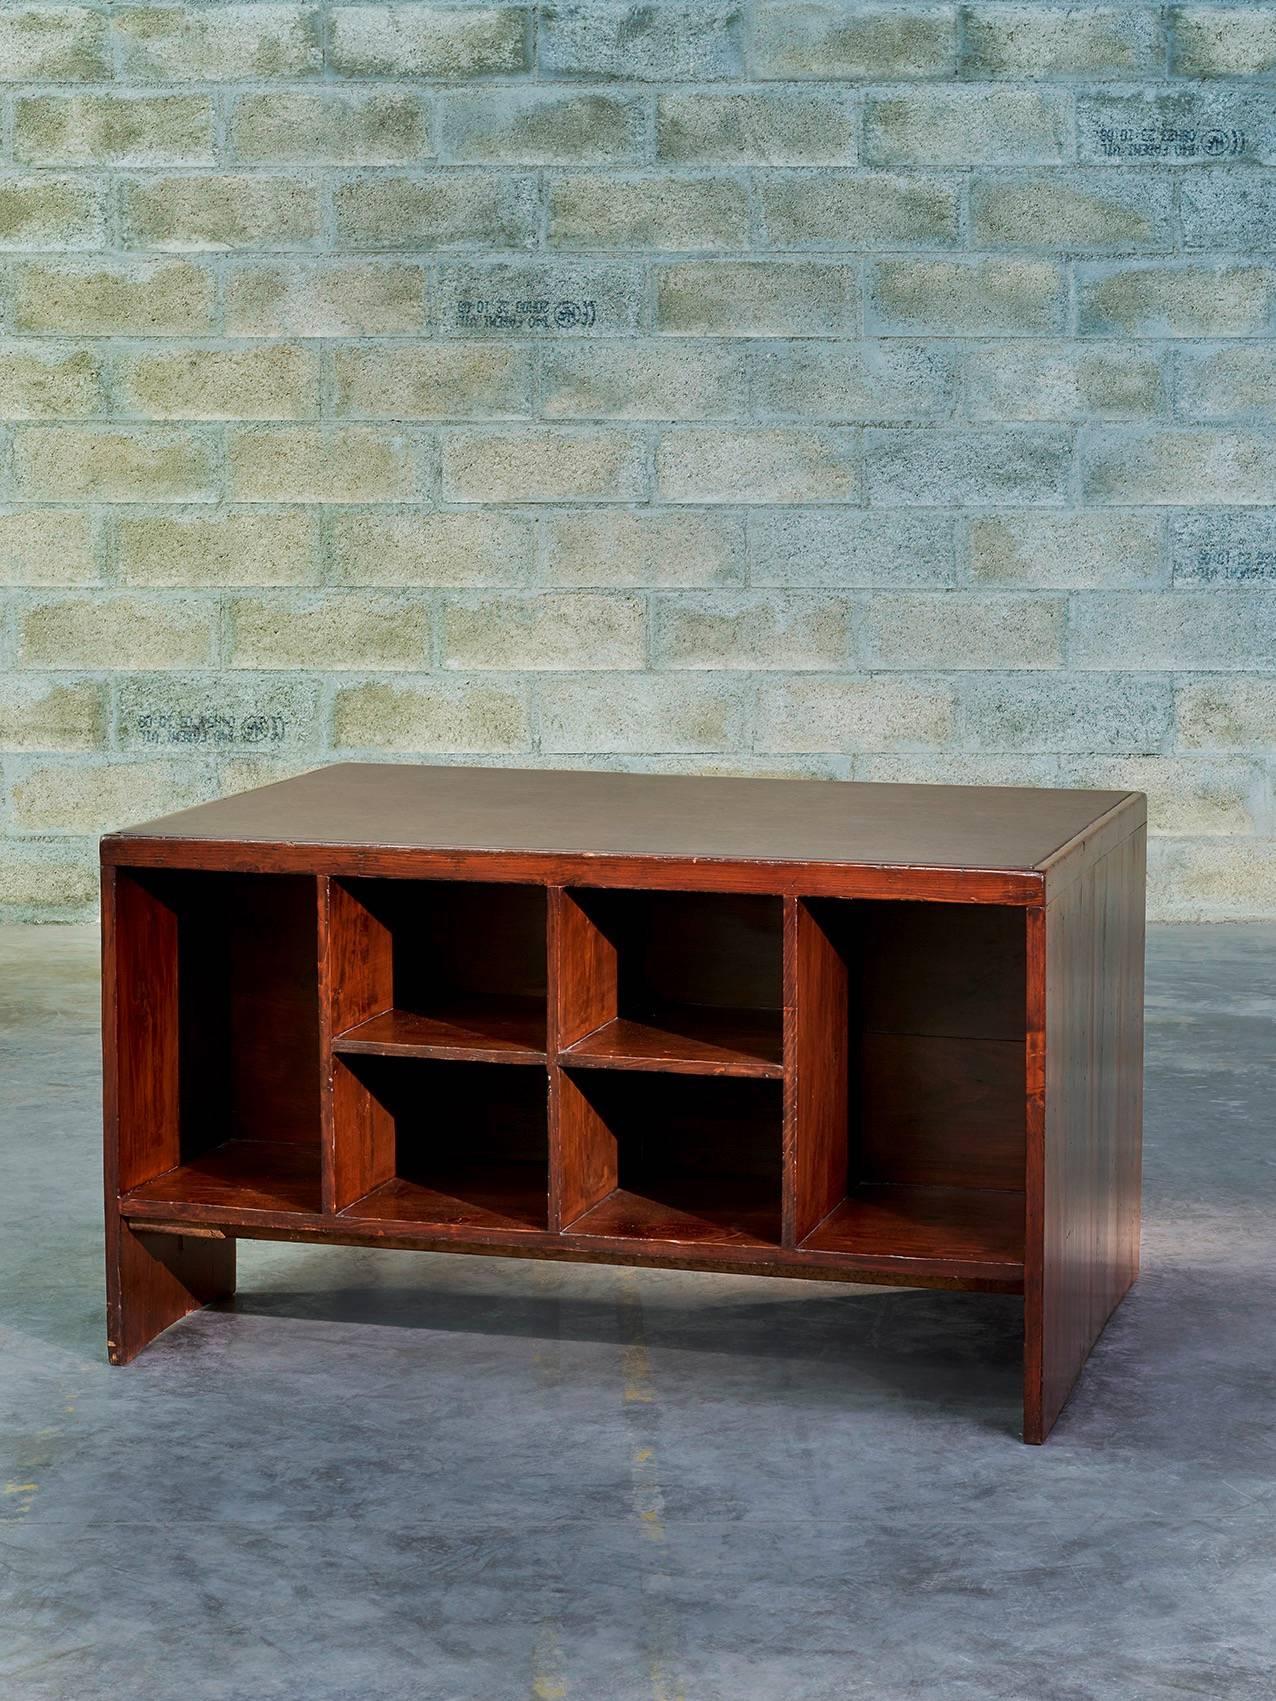 Pierre Jeanneret (1896-1967).

Base building desk,
circa 1955.

Desk made of teak, with one lateral drawer, six front racks, black leather top.

Provenance: Special commission for the administrative buildings of Chandigarh, India.